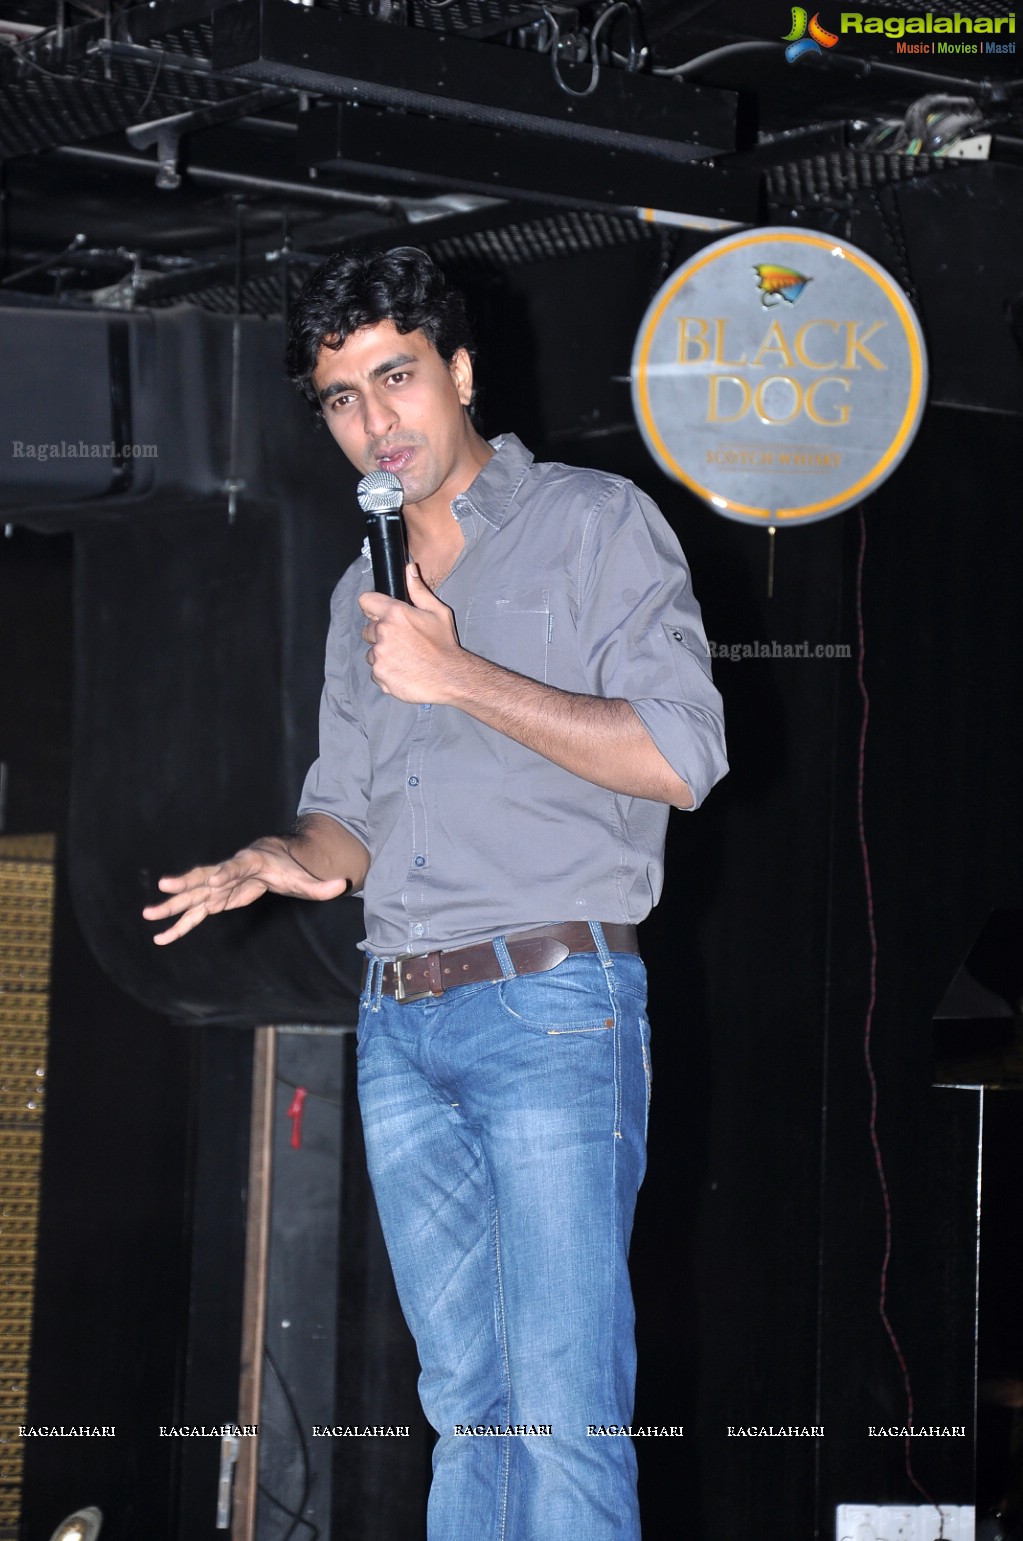 The Kingfisher Comedy Nights at The Park, Hyd